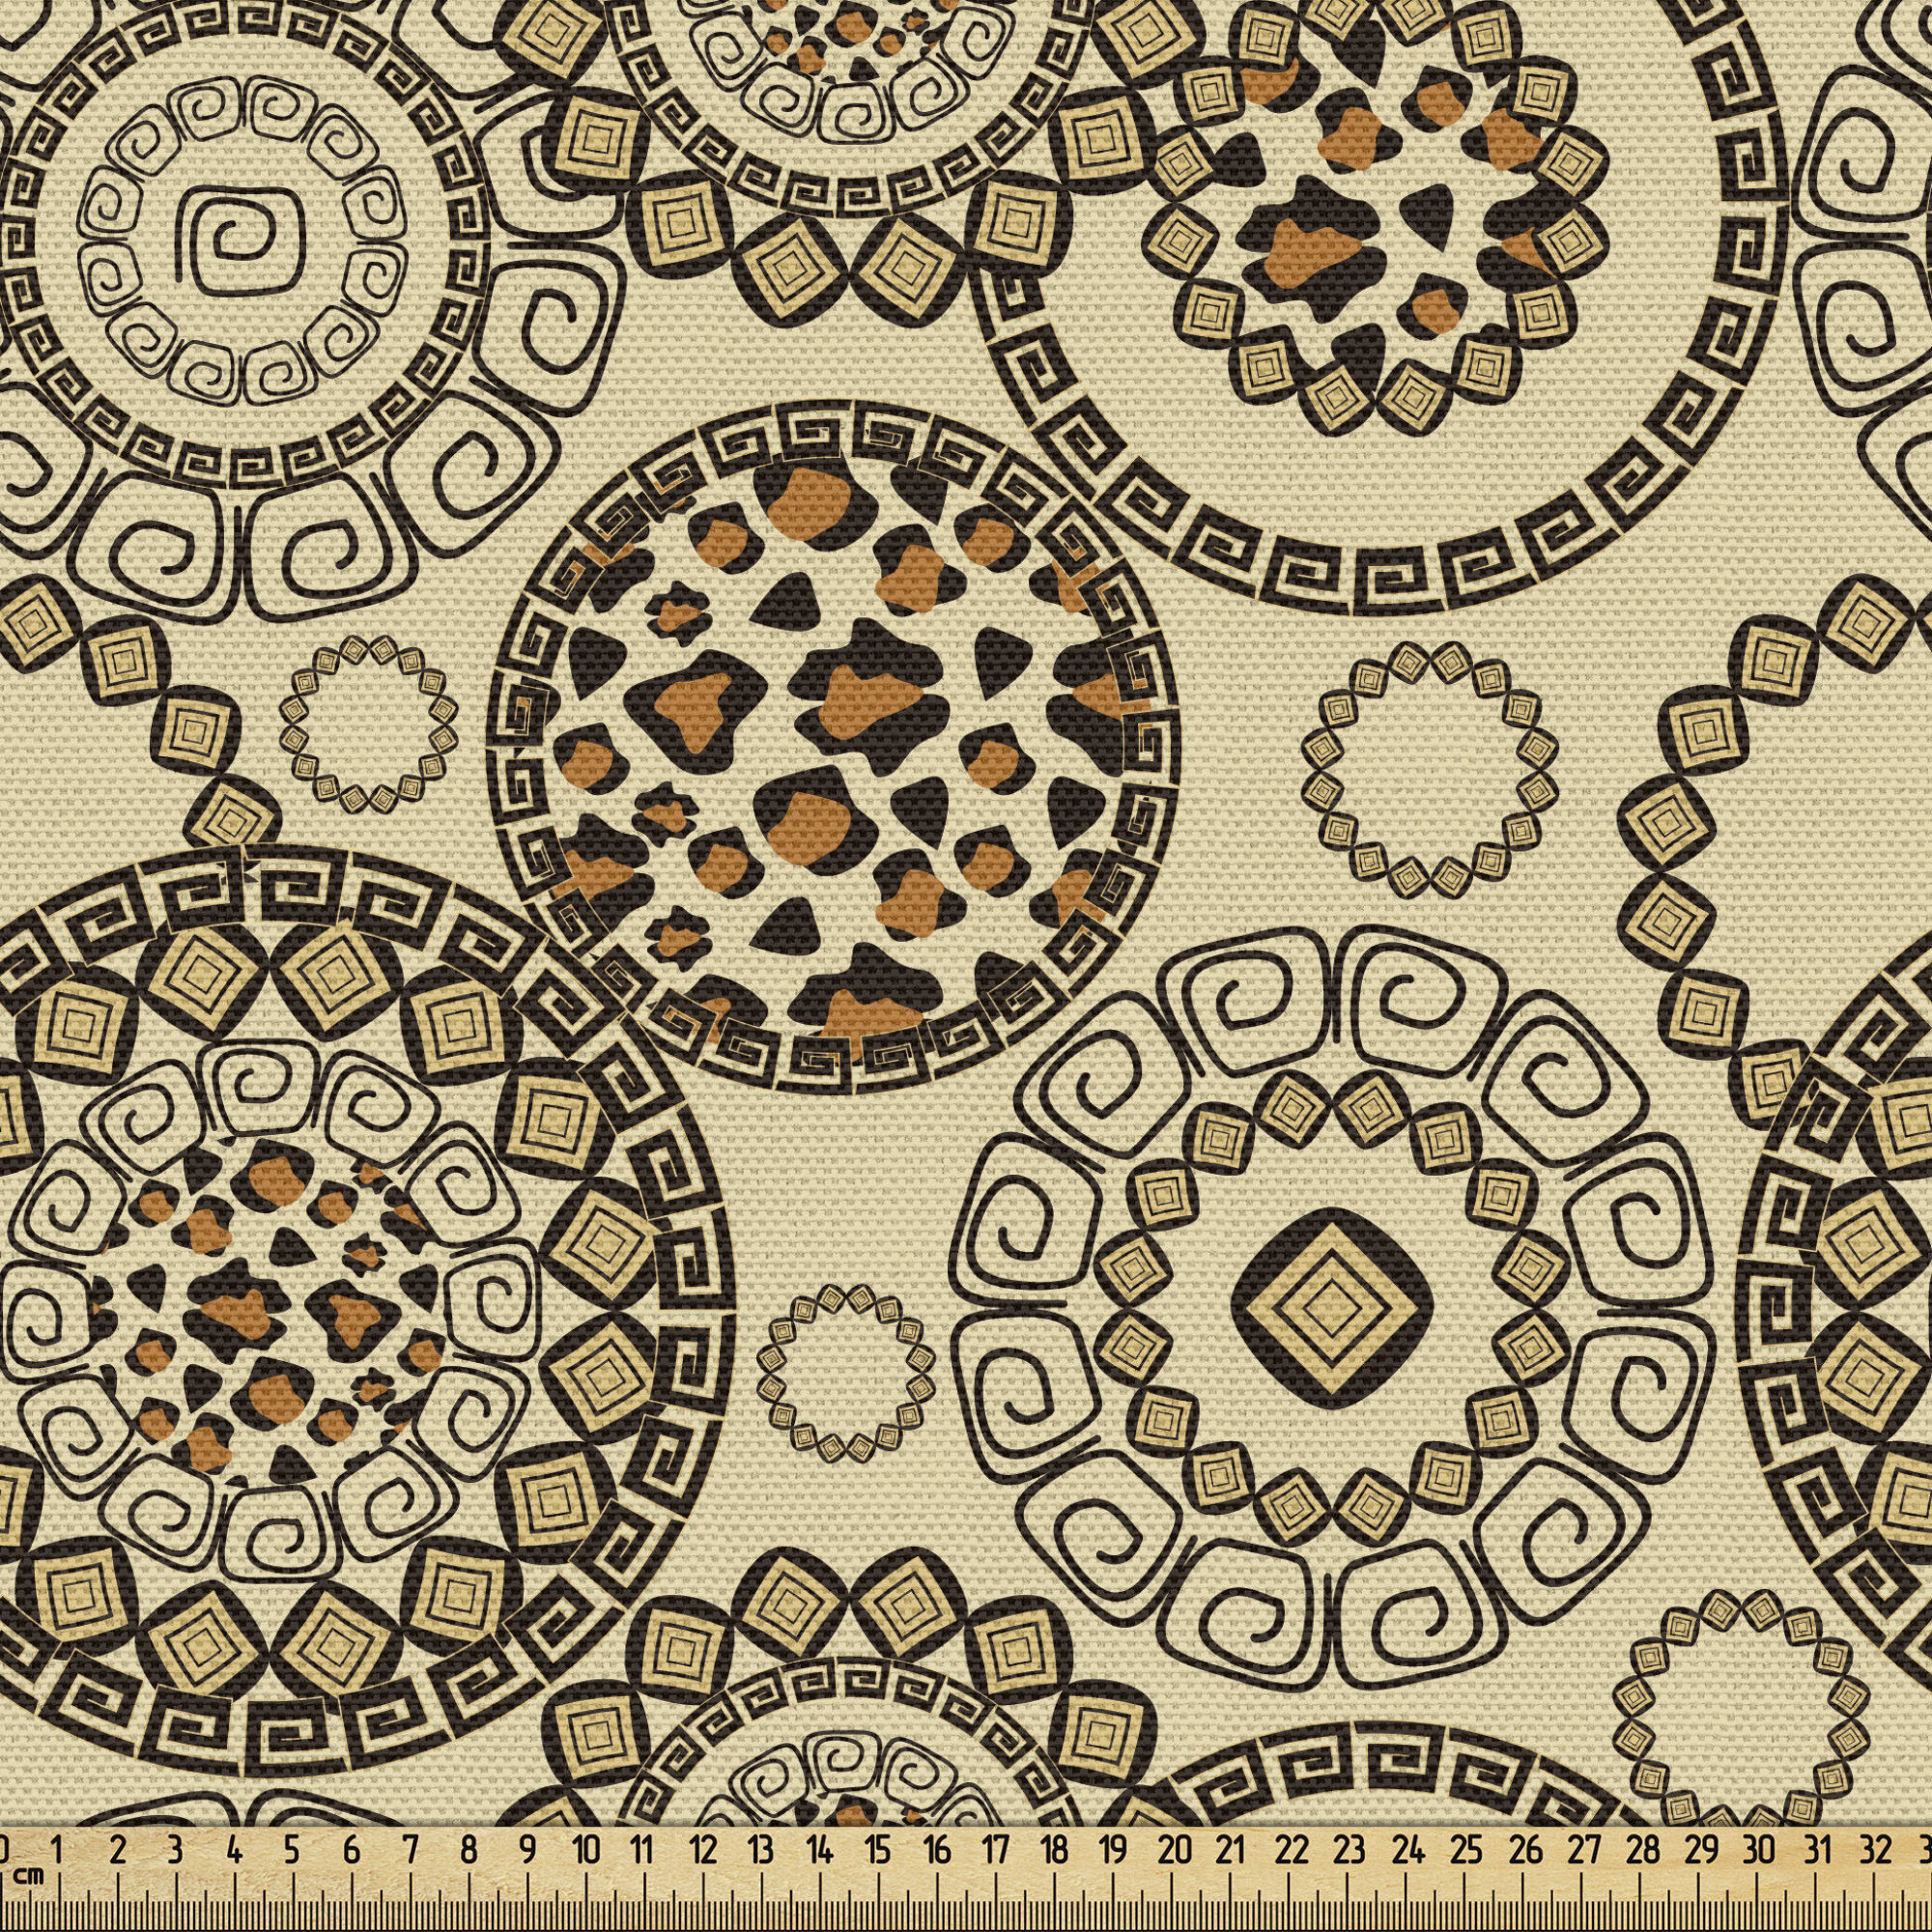 East Urban Home fab_18549_Ambesonne Animal Print Fabric By The Yard, Safari  Pattern Cheetah Skin Print Fauna Theme In Neutral Colors, Decorative Fabric  For Upholstery And Home Accents, Brown Beige | Wayfair